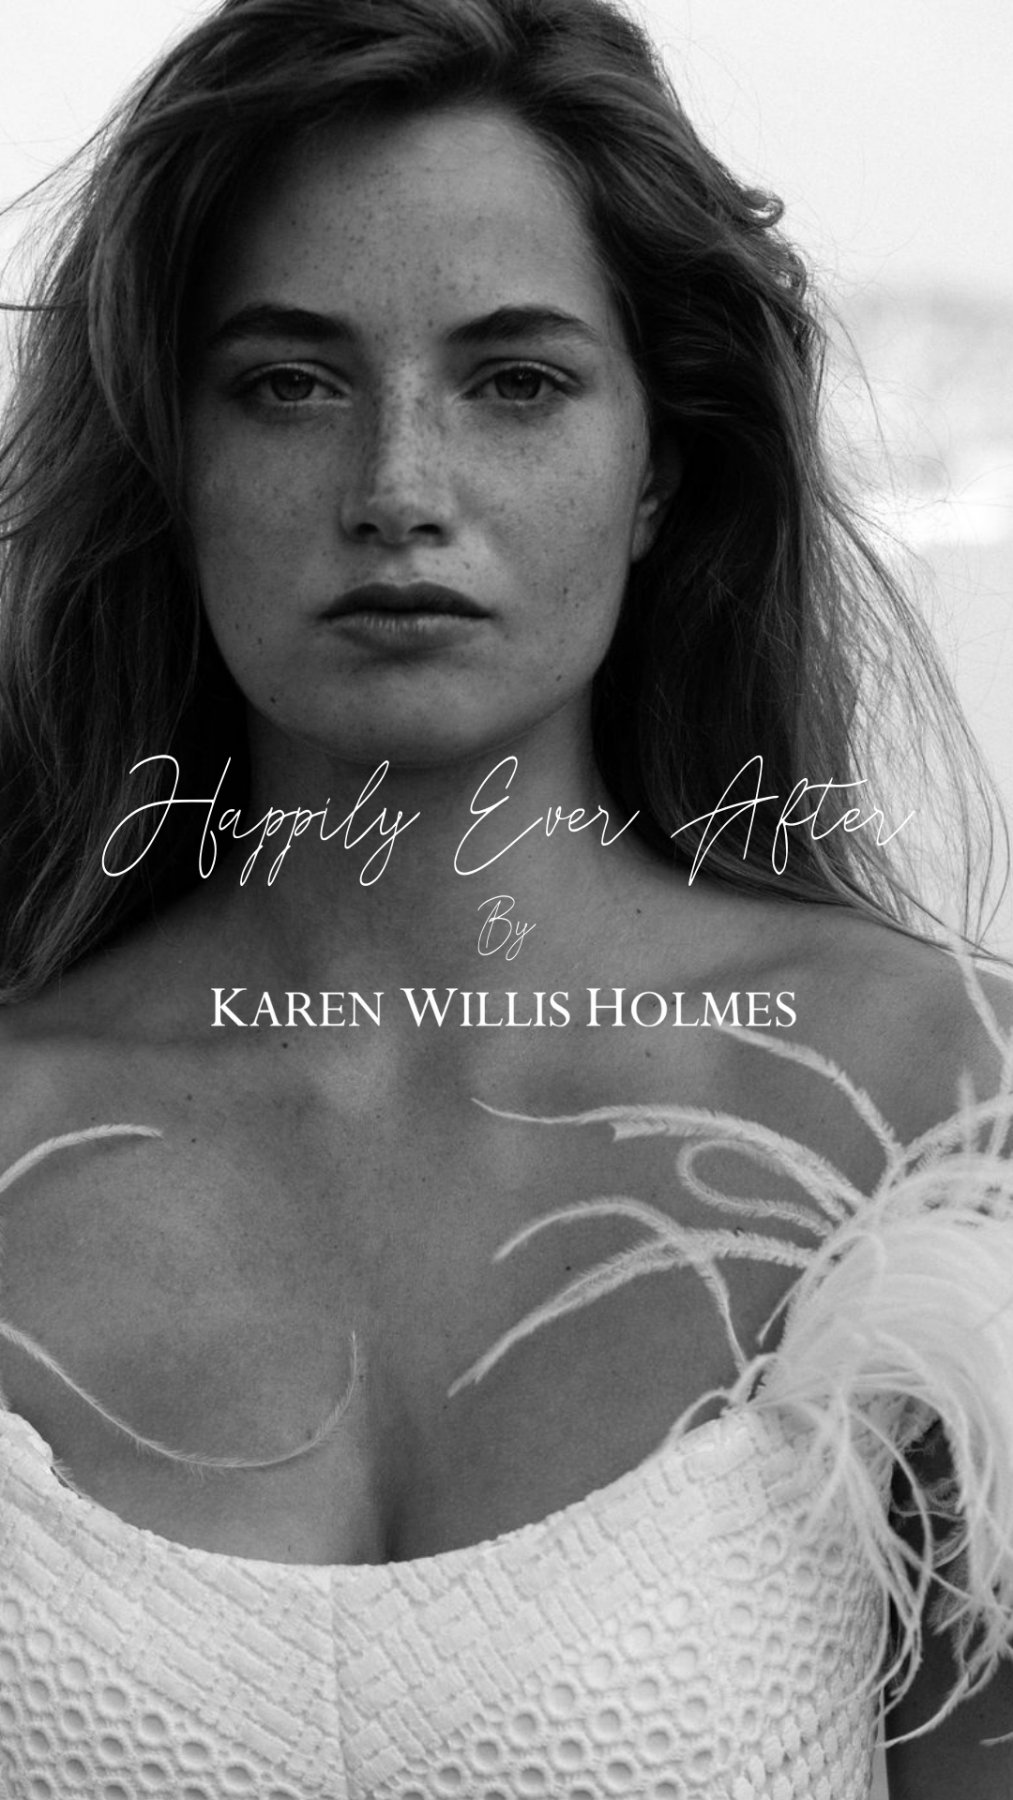 Happily Ever After by Karen Willis Holmes-Our finalists-Dress giveaway